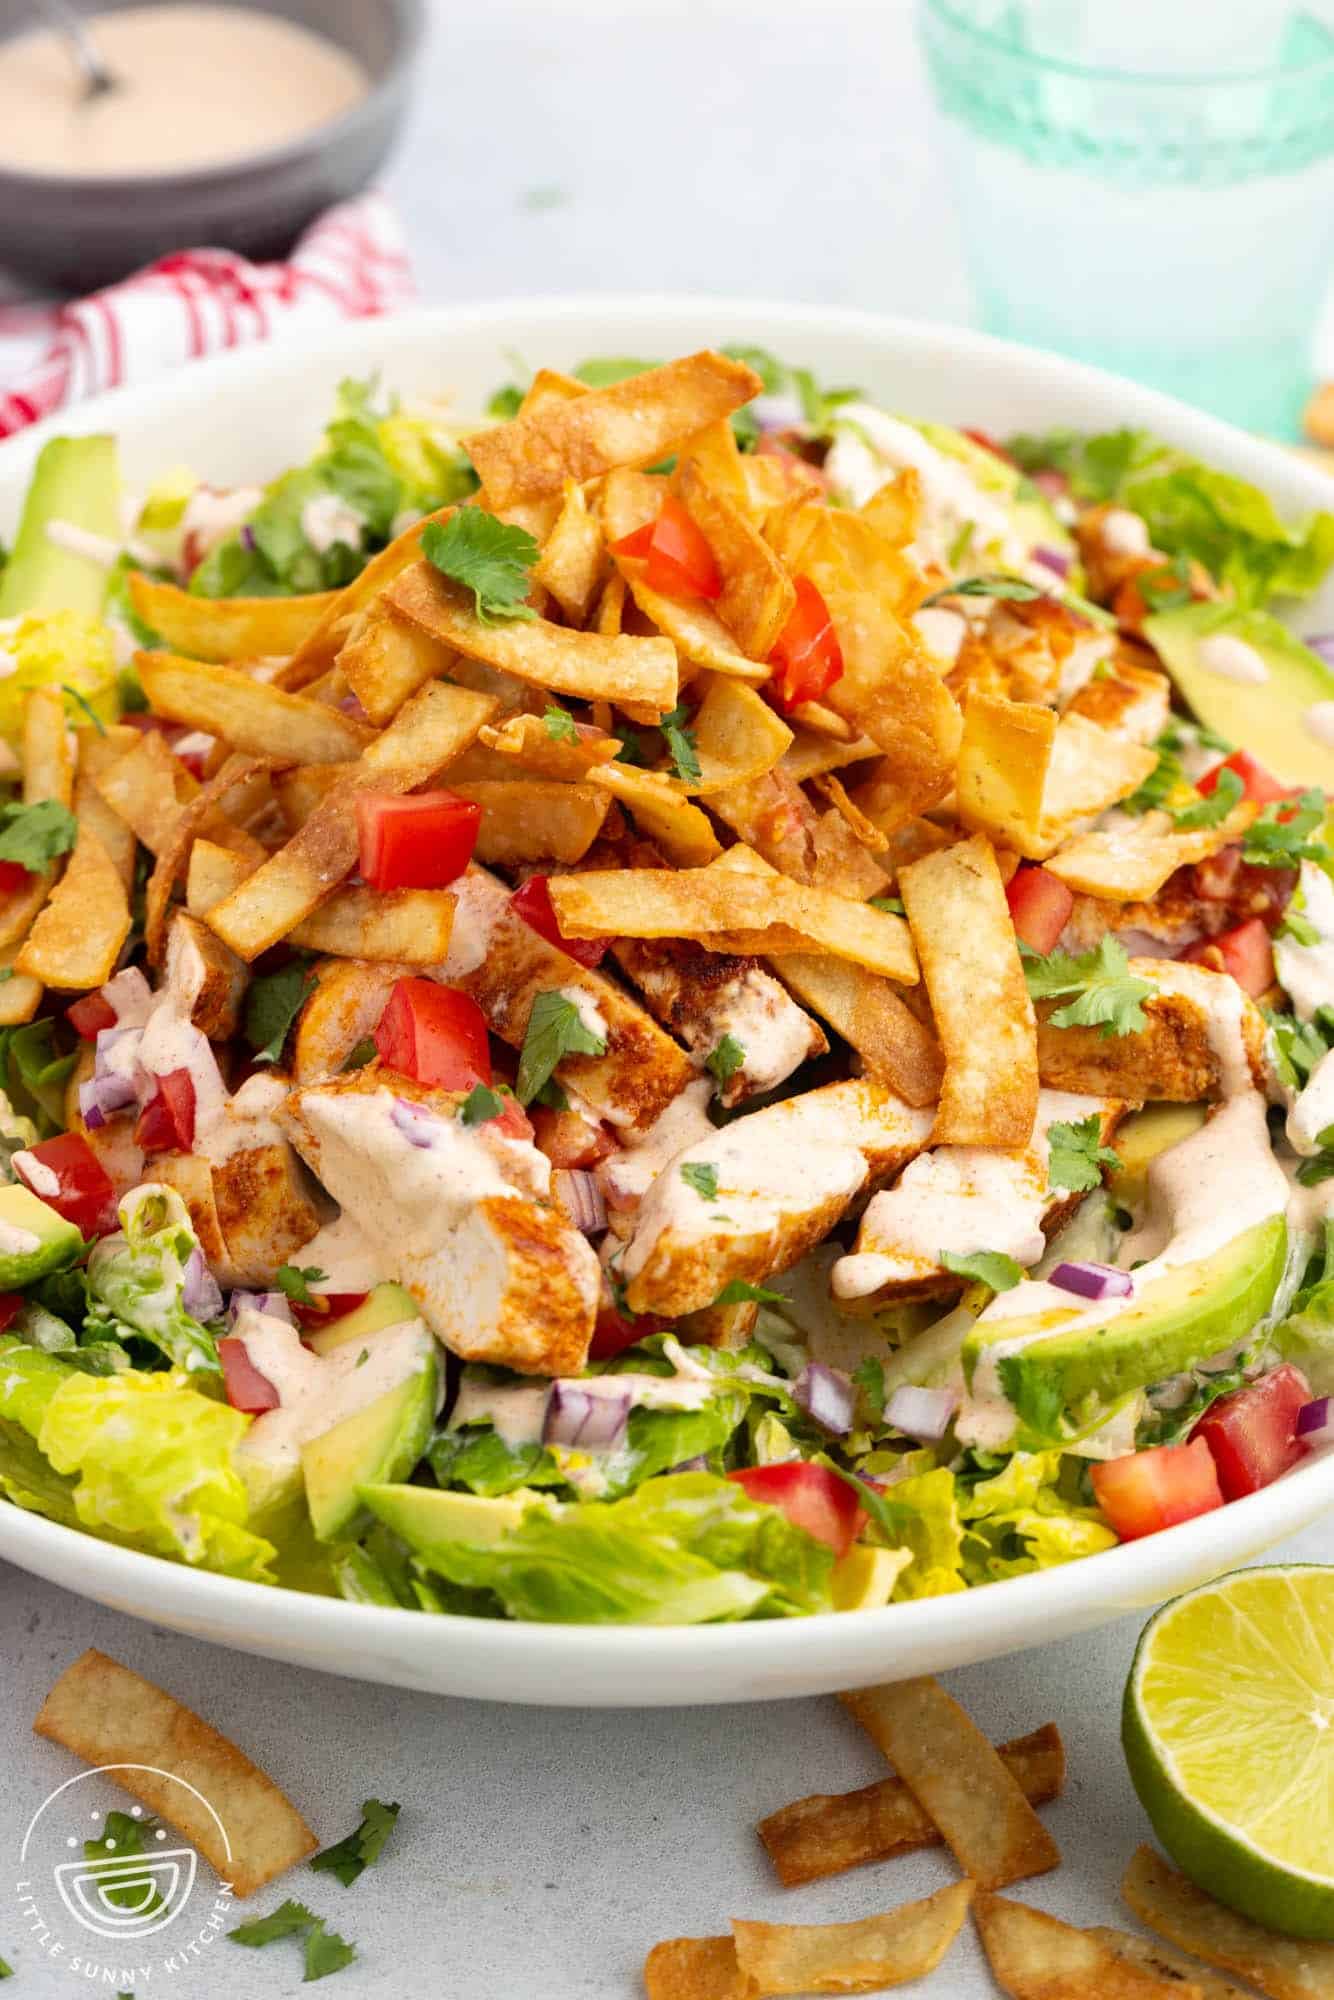 a large bowl of salad with santa fe chicken and tortillas.